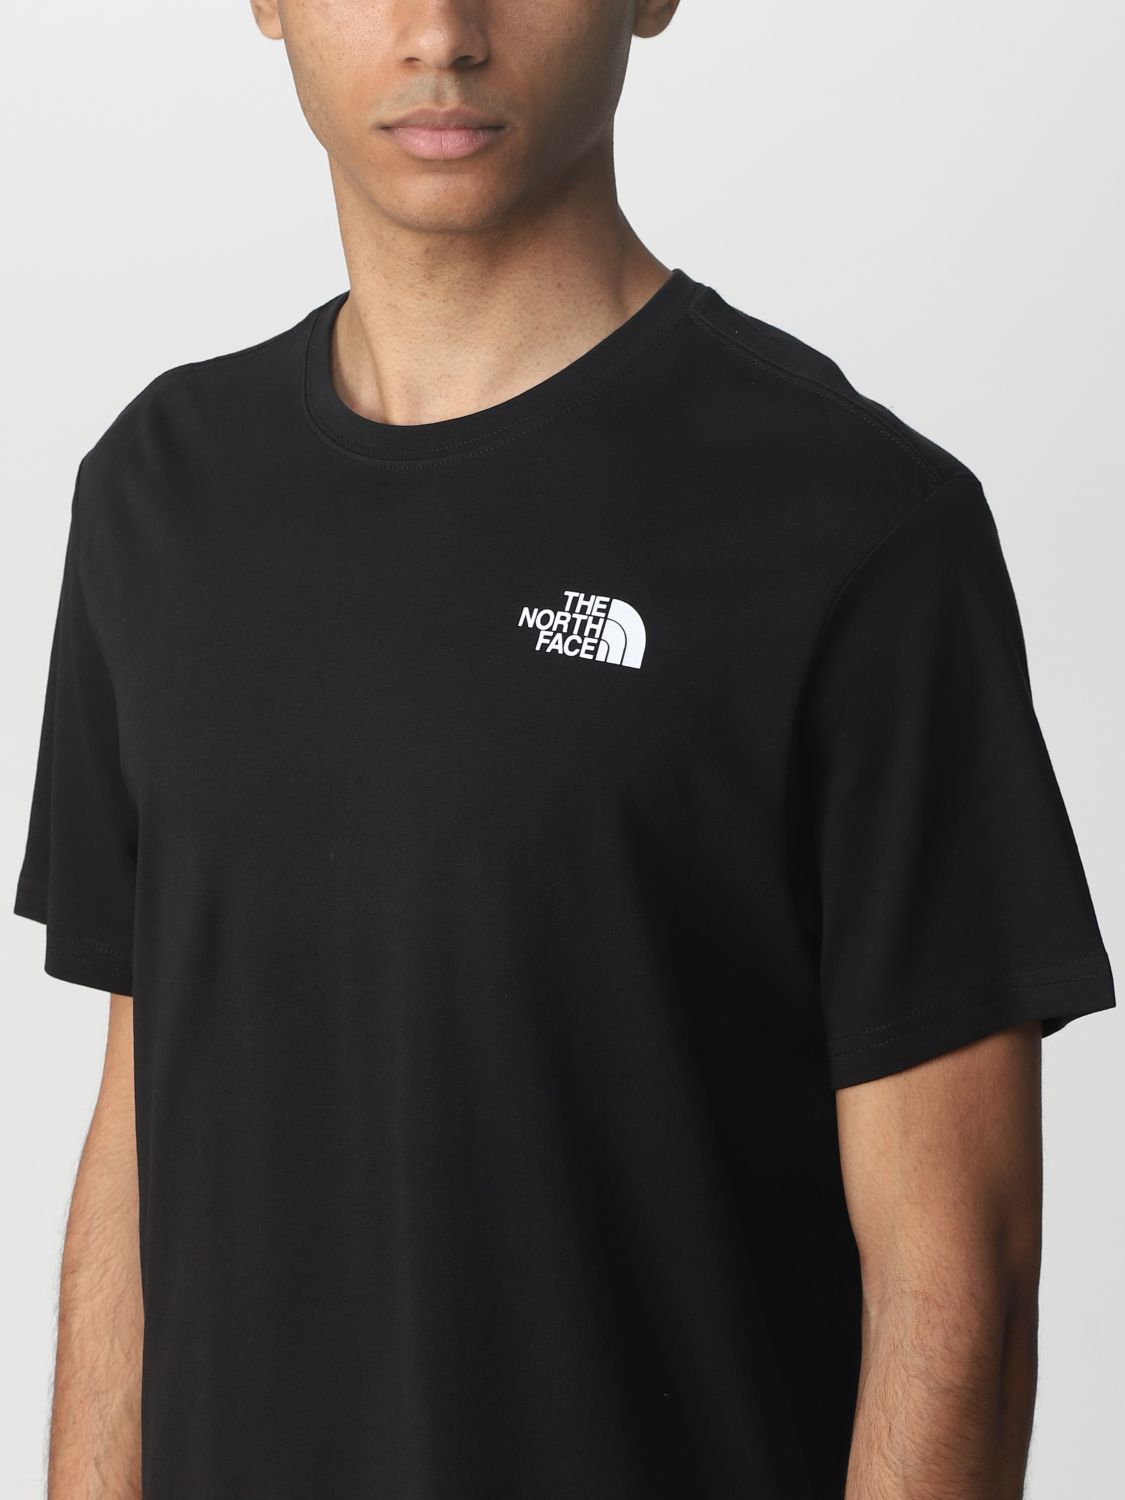 THE NORTH FACE: t-shirt for men - Black | The North Face t-shirt ...